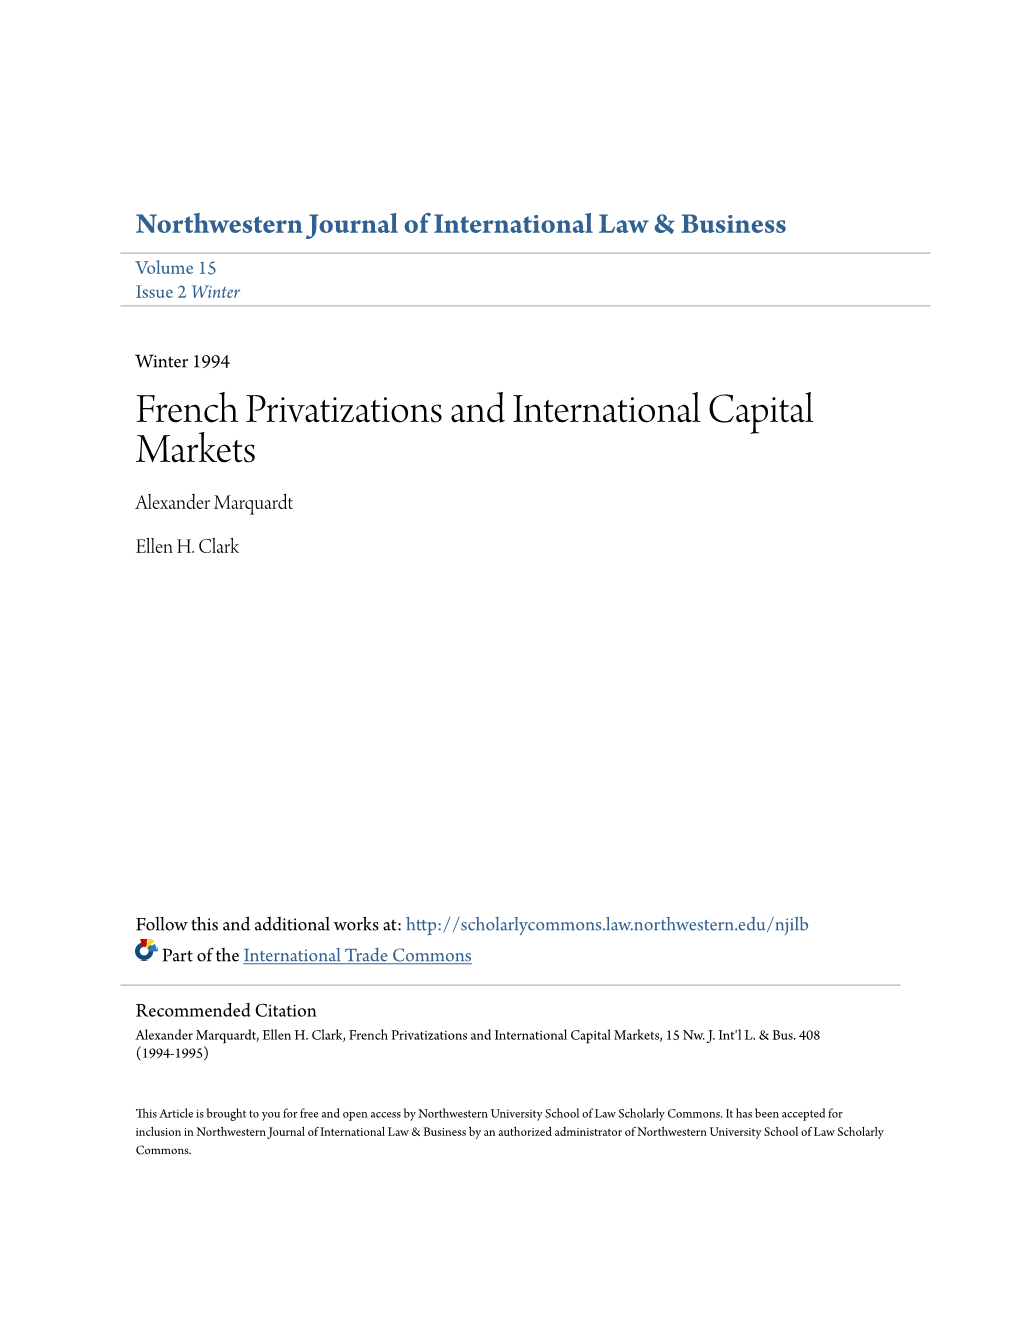 French Privatizations and International Capital Markets Alexander Marquardt